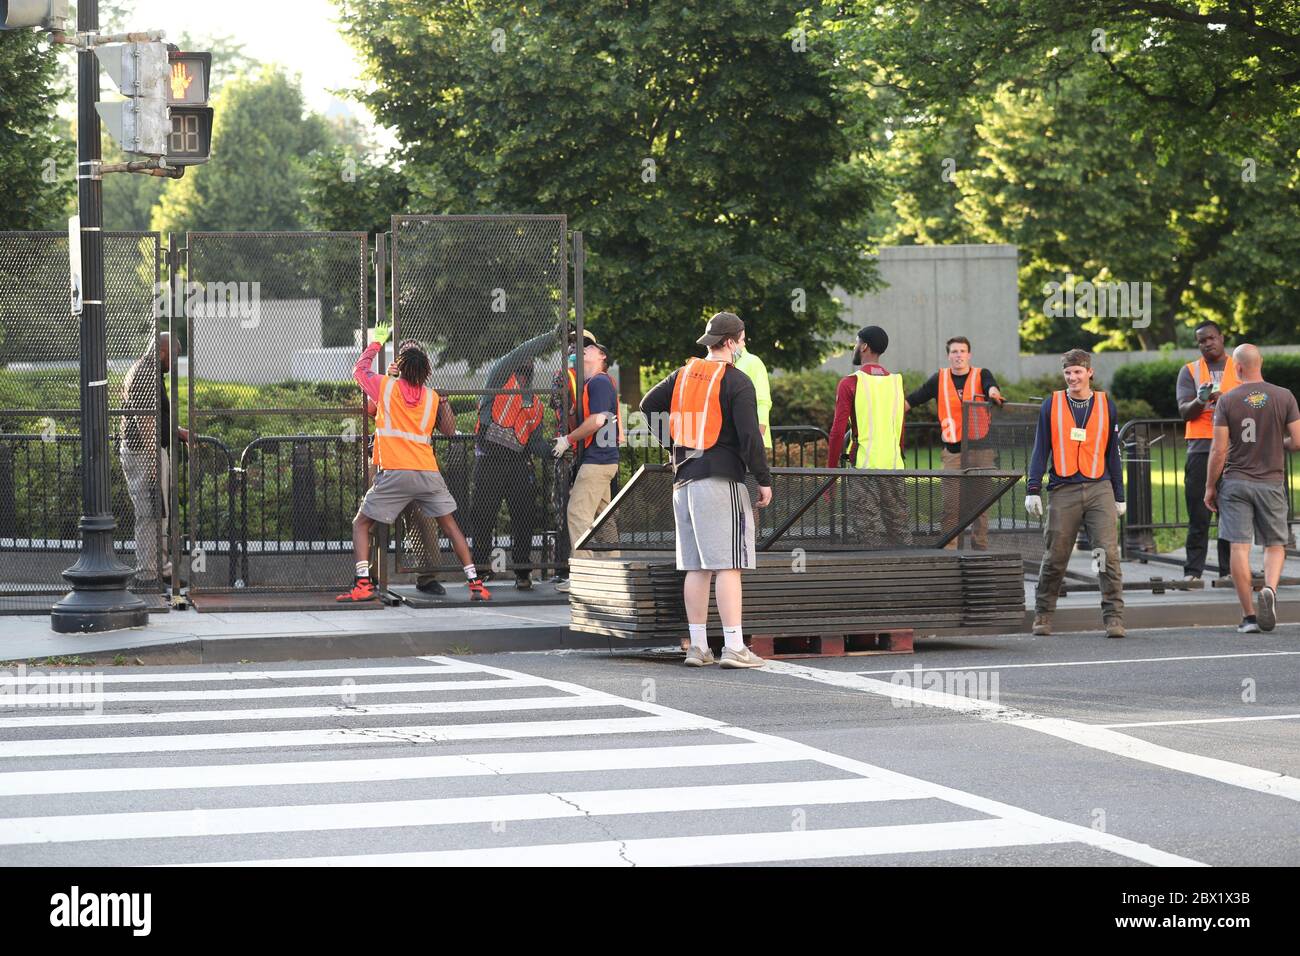 Washington DC, USA. 4th June, 2020. Washington, DC preps for another Day of George Floyd protests by barricading various points in the D.C area on June 4, 2020. Credit: Mpi34/Media Punch/Alamy Live News Stock Photo